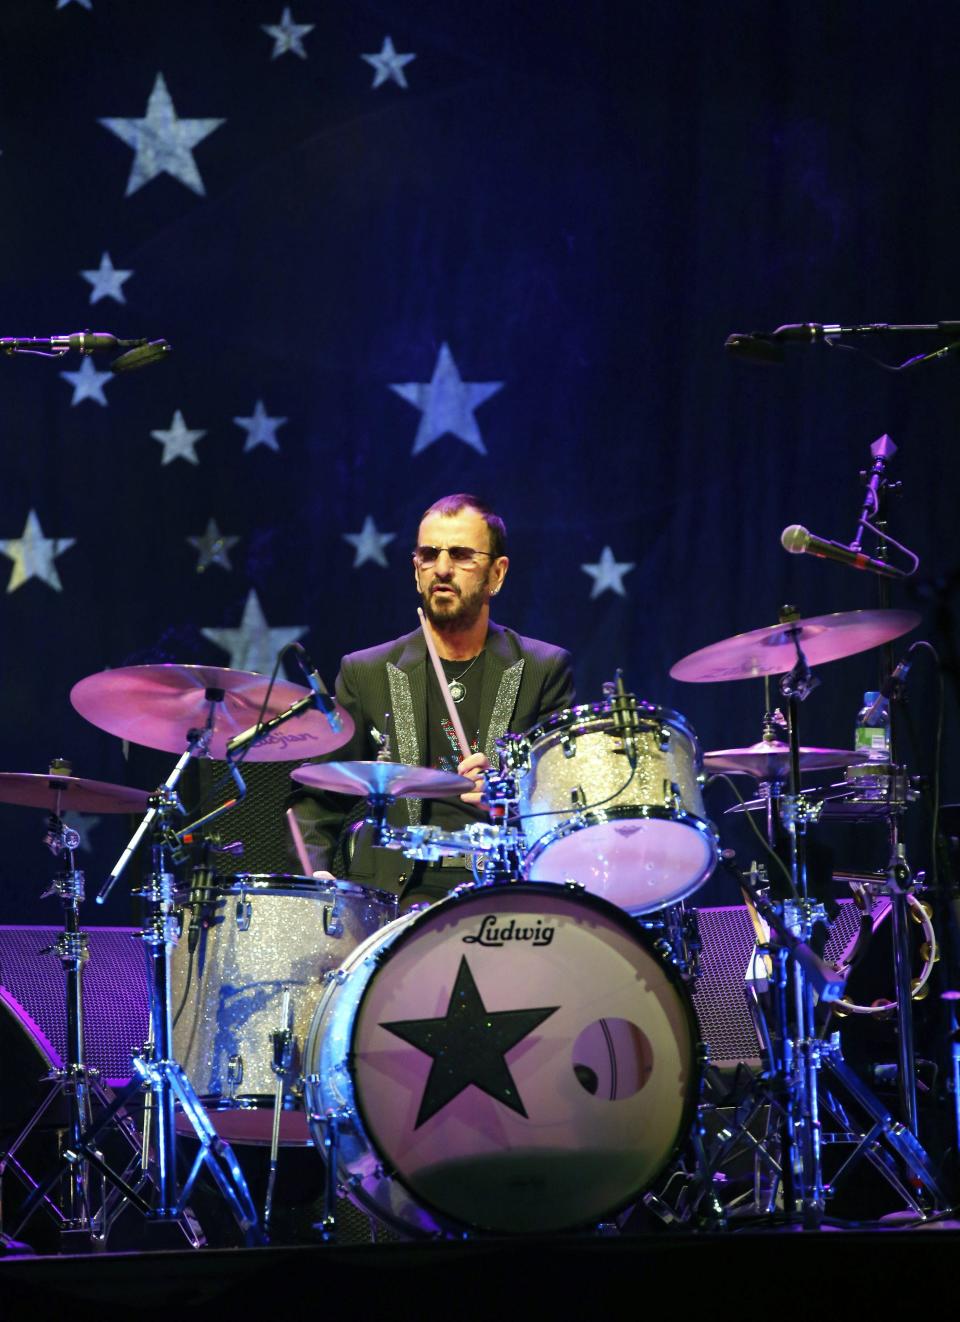 Ringo Starr will hit the road again with his All-Starr band this summer.